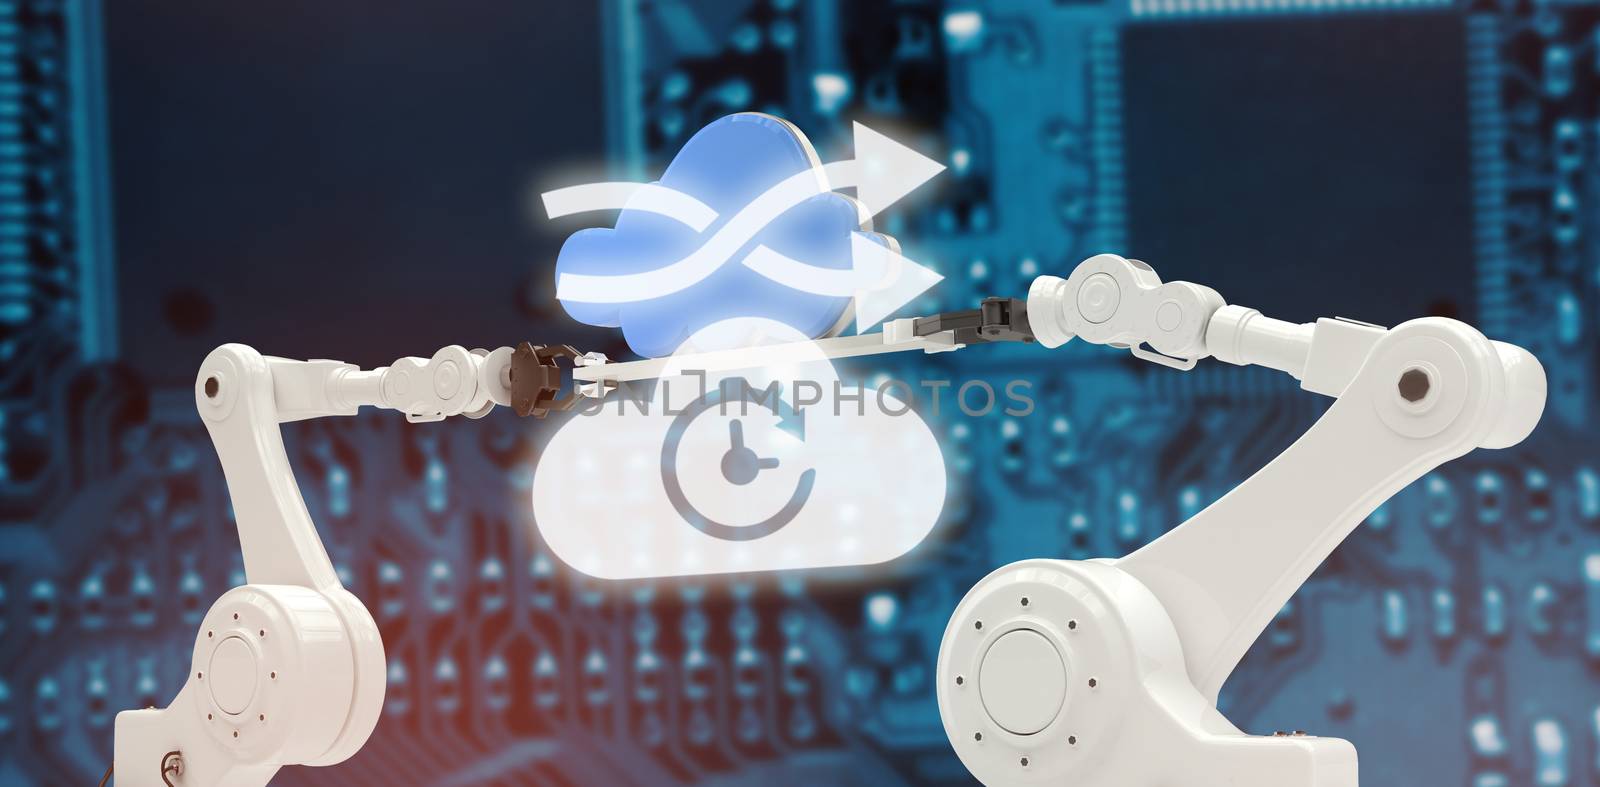 Digital image of arrow sign with cloud against blue pcb